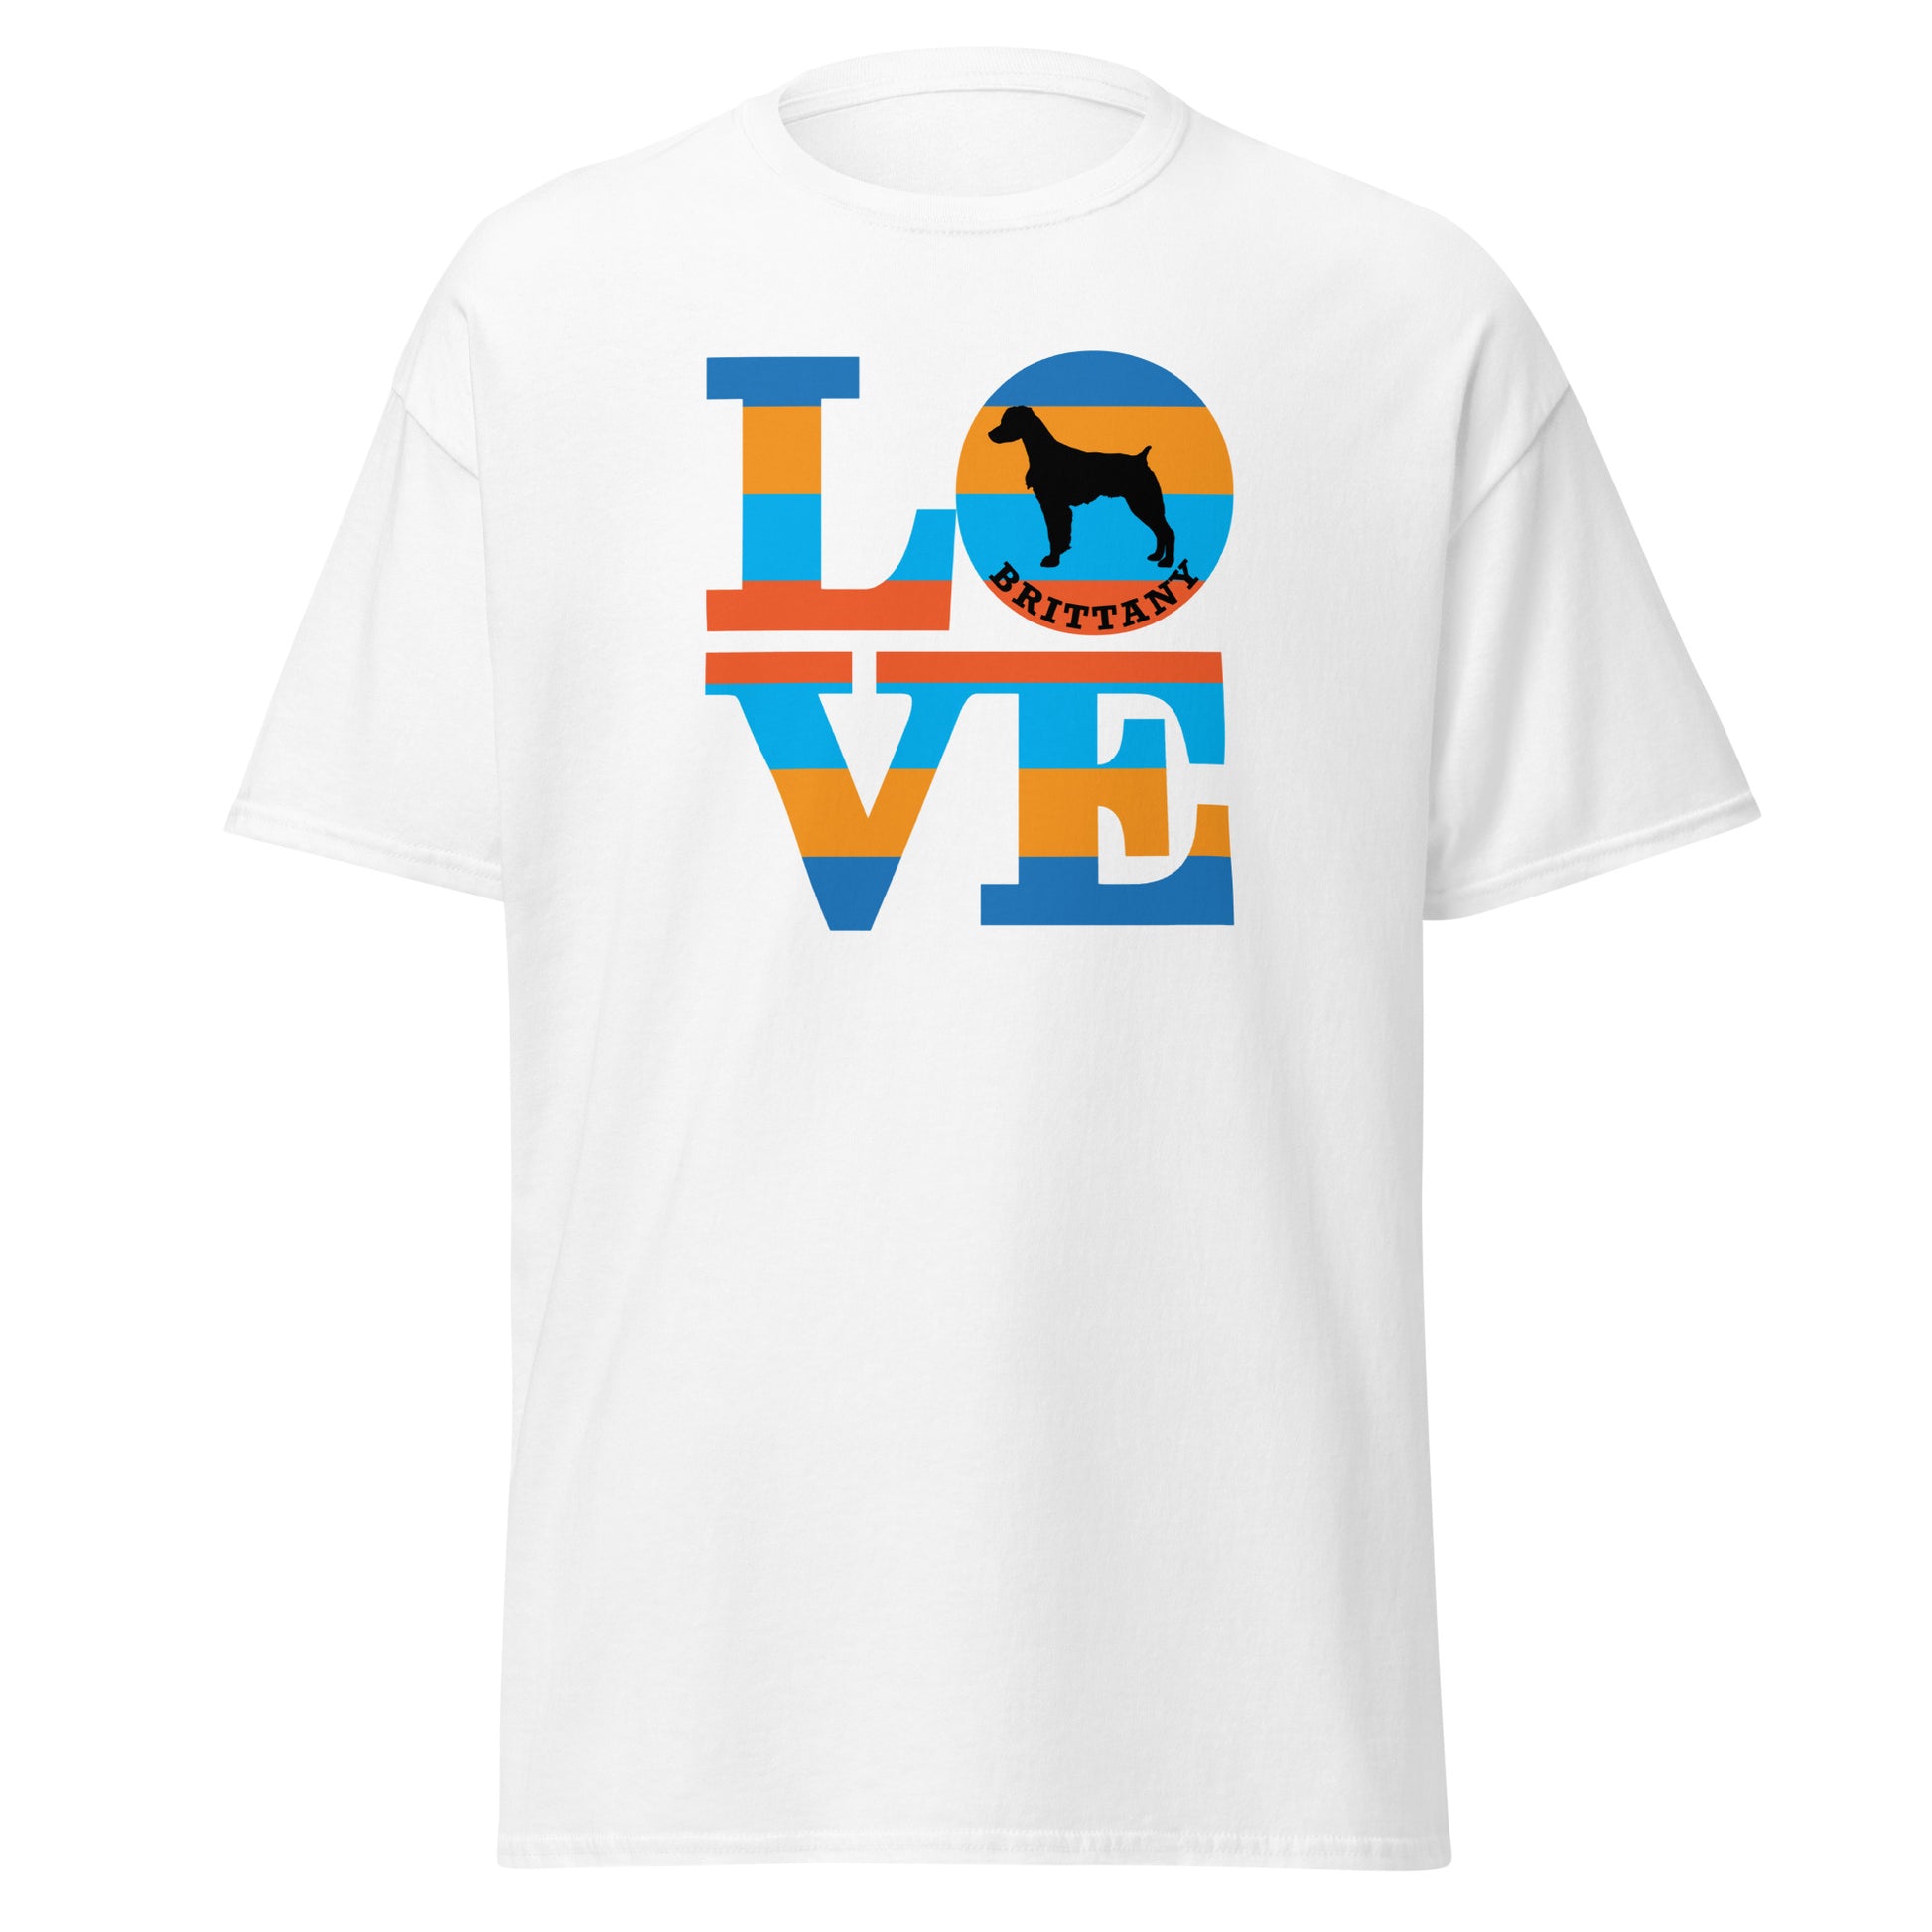 Brittany Love men’s white t-shirt by Dog Artistry.